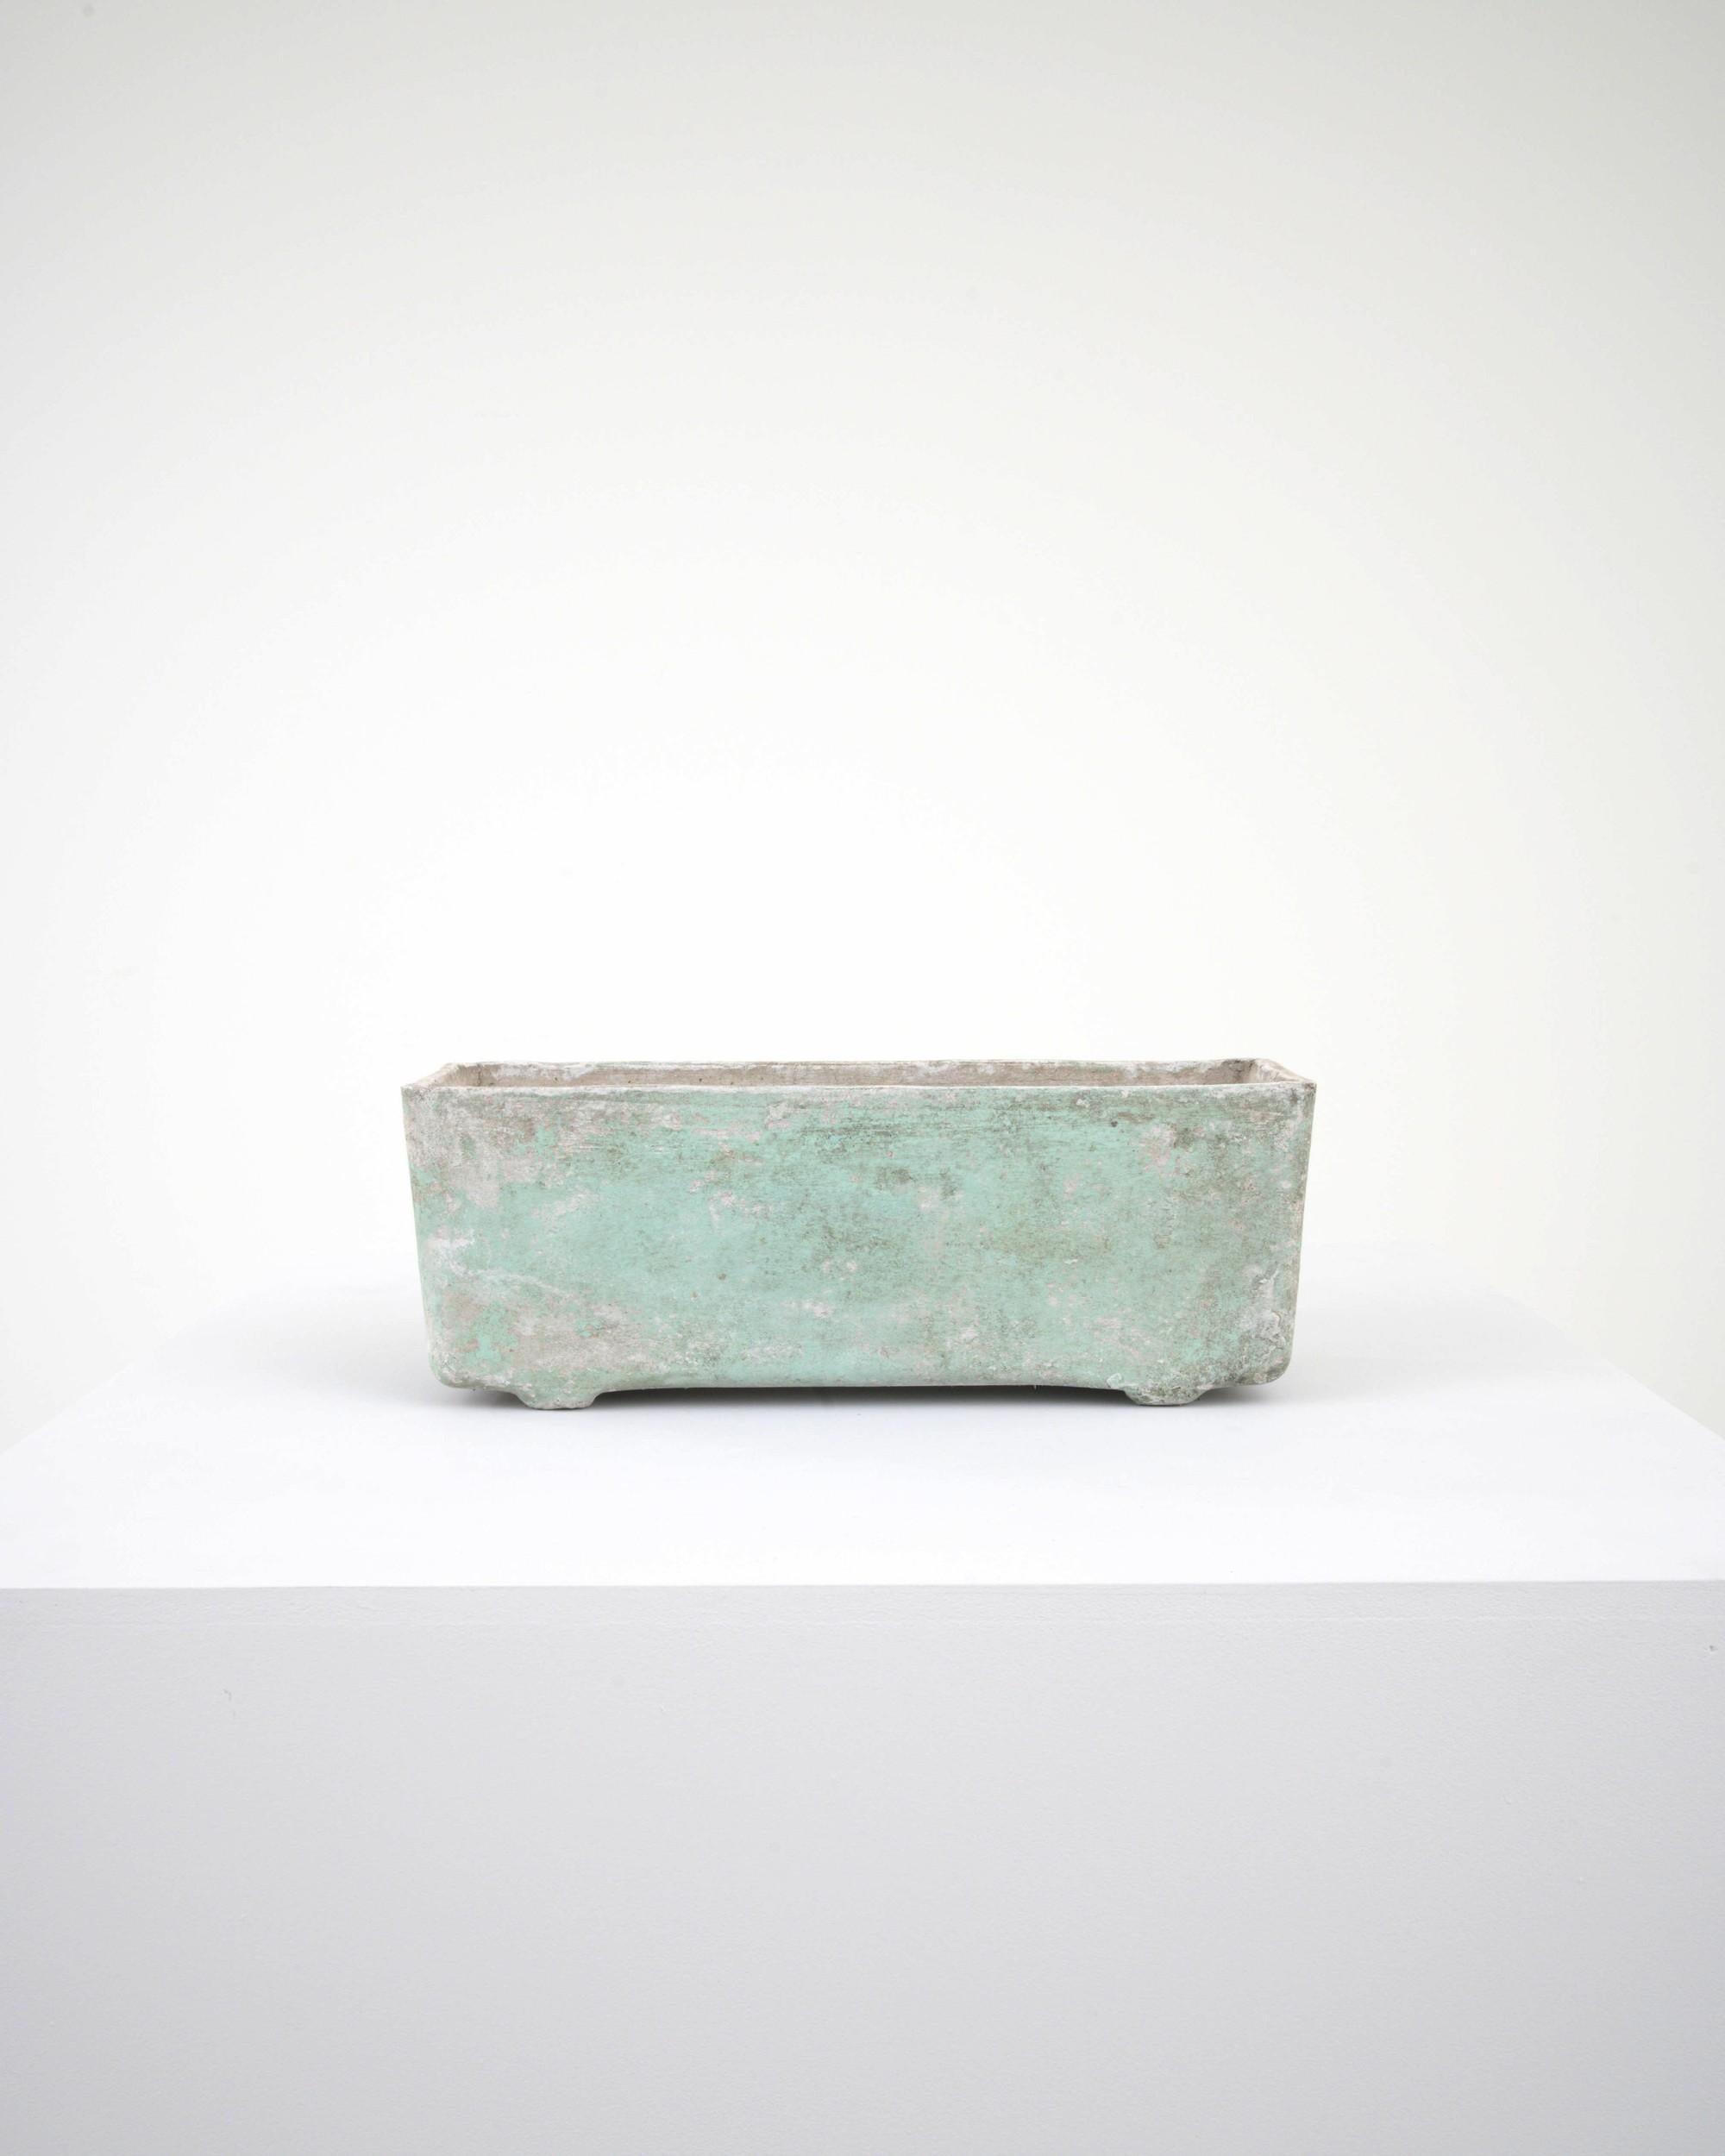 A minimalist shape combined with an evocative patina gives this vintage planter a unique personality. Made in France in the 1960s, a square container, unembellished save for indented feet, strips form back to its essentials. The attractive patina